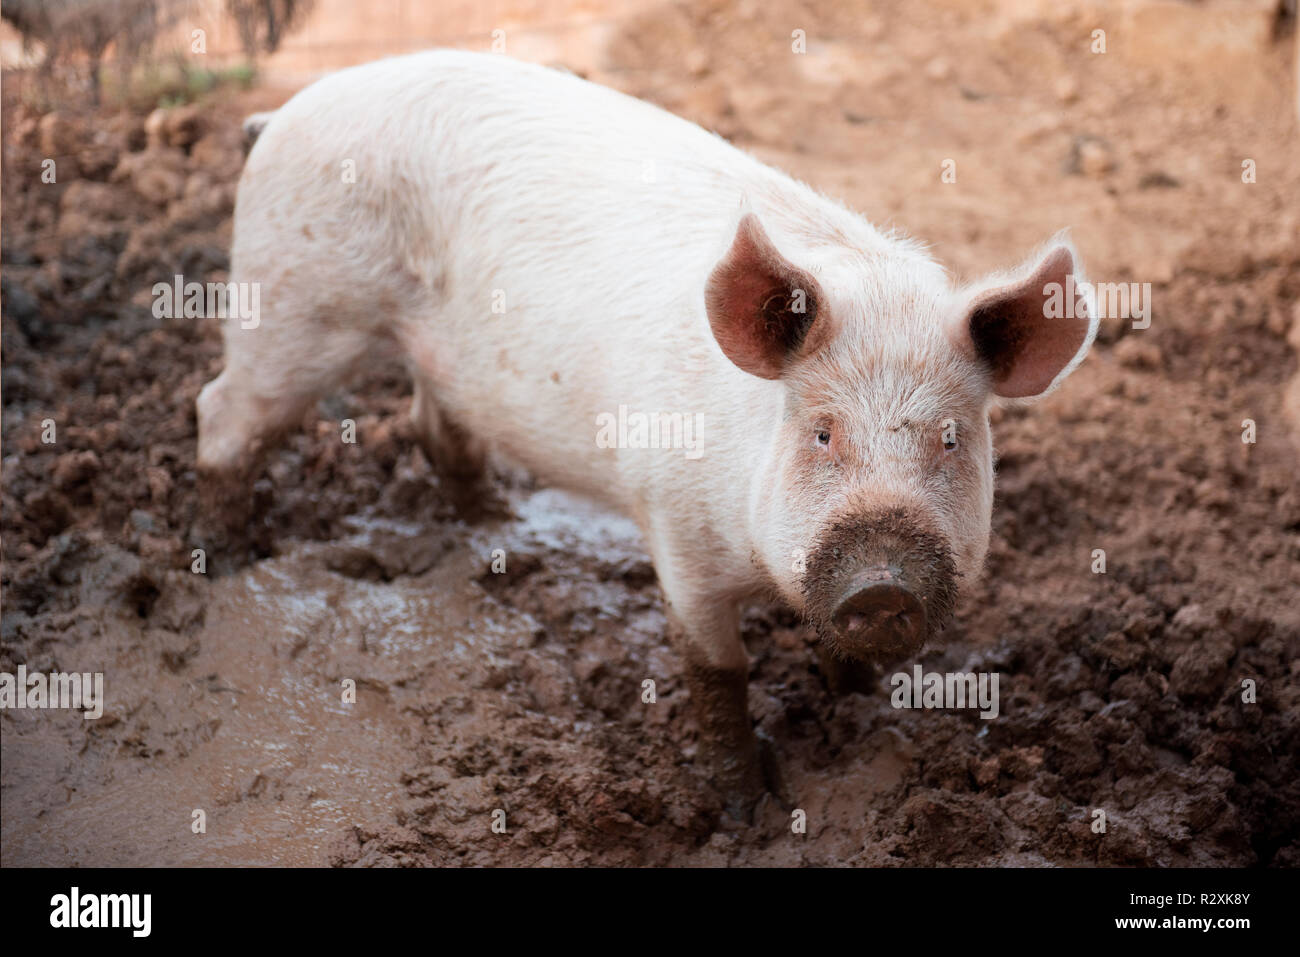 Young pig in a pigsty with a dirty muzzle Stock Photo